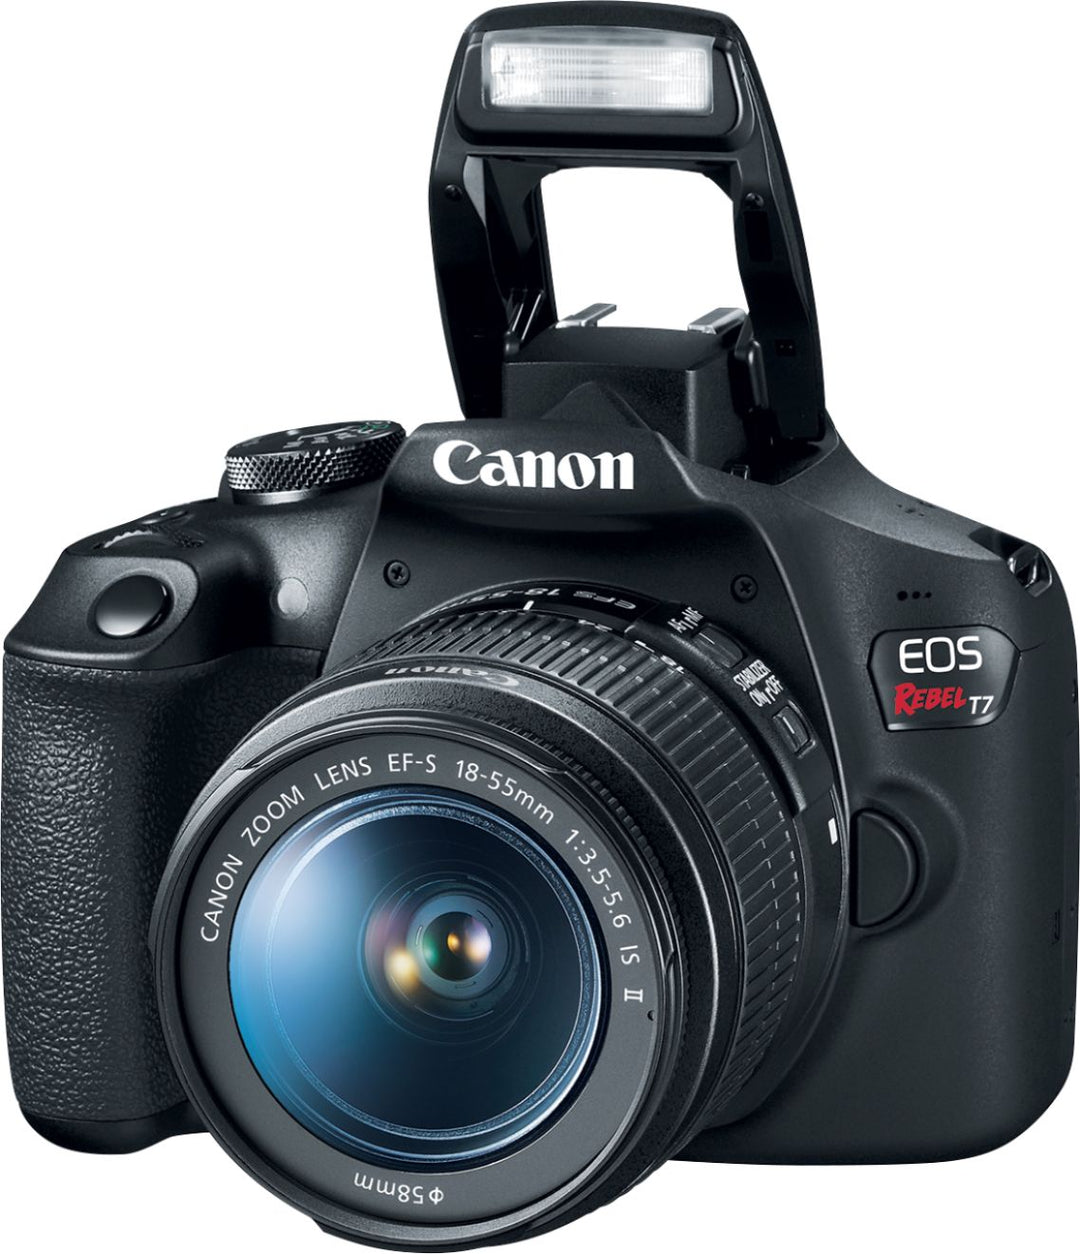 Canon - EOS Rebel T7 DSLR Video Camera with 18-55mm Lens - Black_4